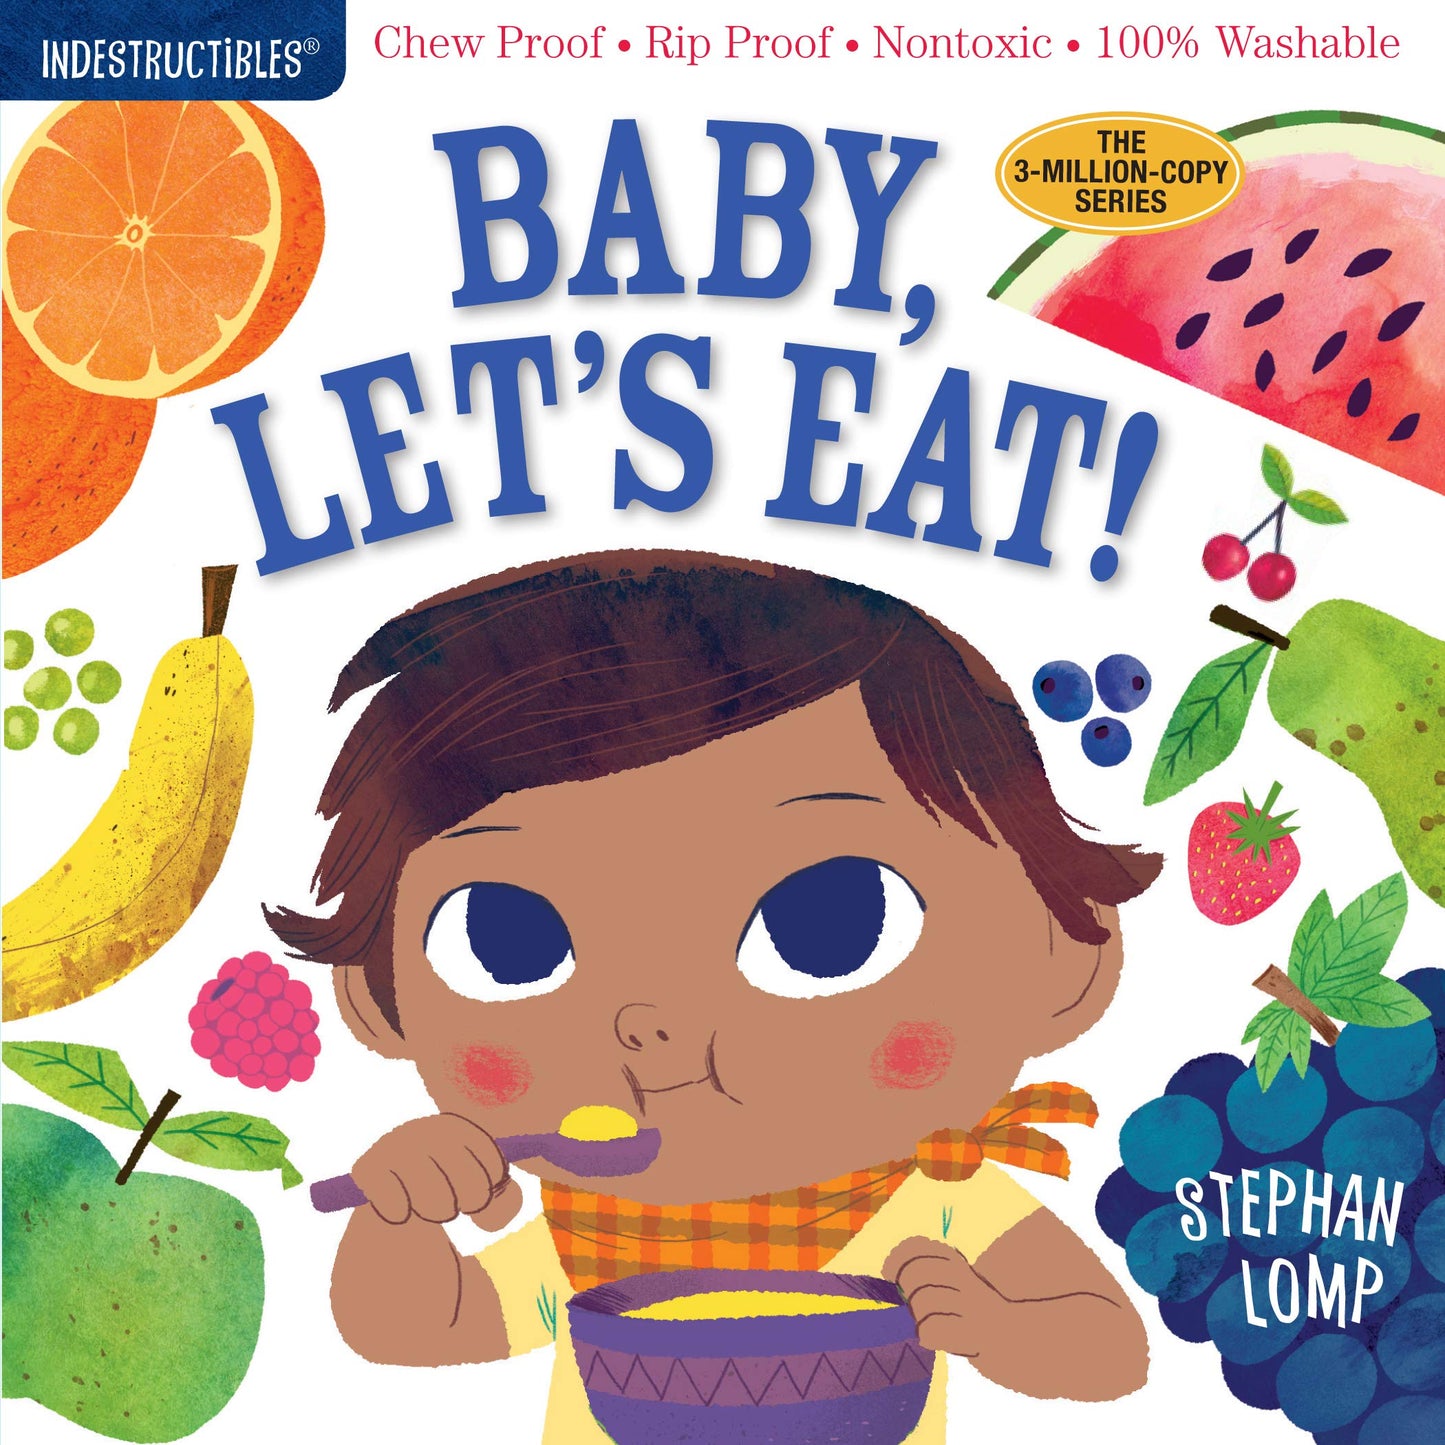 front cover of book has illustration of a boy eating a bowl of cereal and surrounded by all types of fruit, title, and author's name